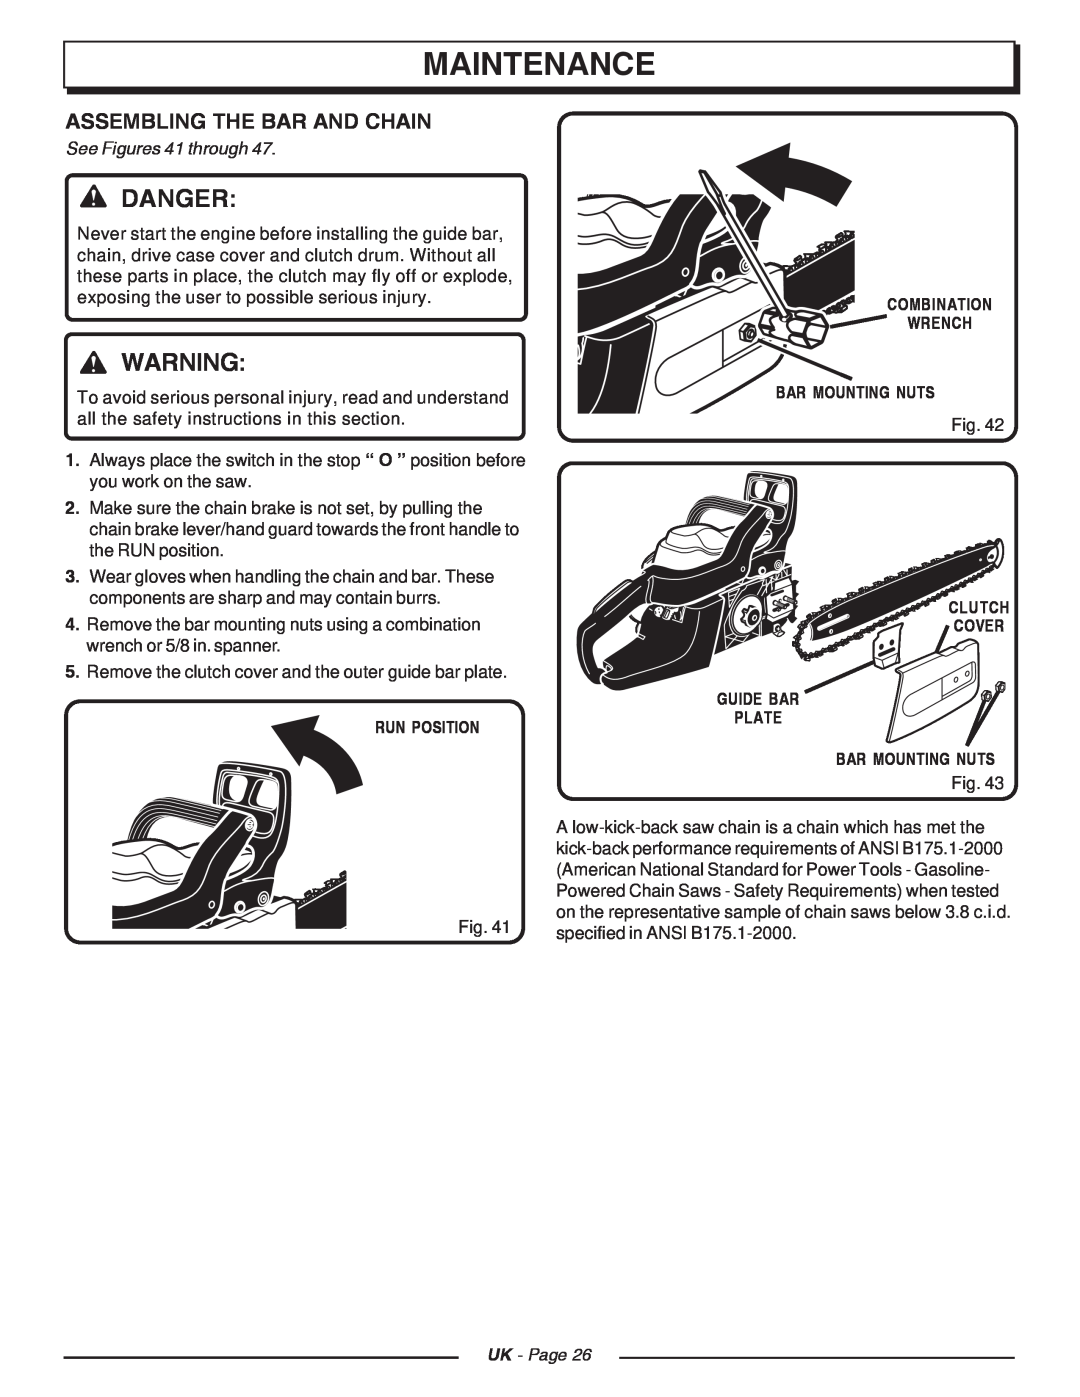 Homelite CSP3816 manual Maintenance, Danger, Assembling The Bar And Chain, See Figures 41 through, Run Position, UK - Page 